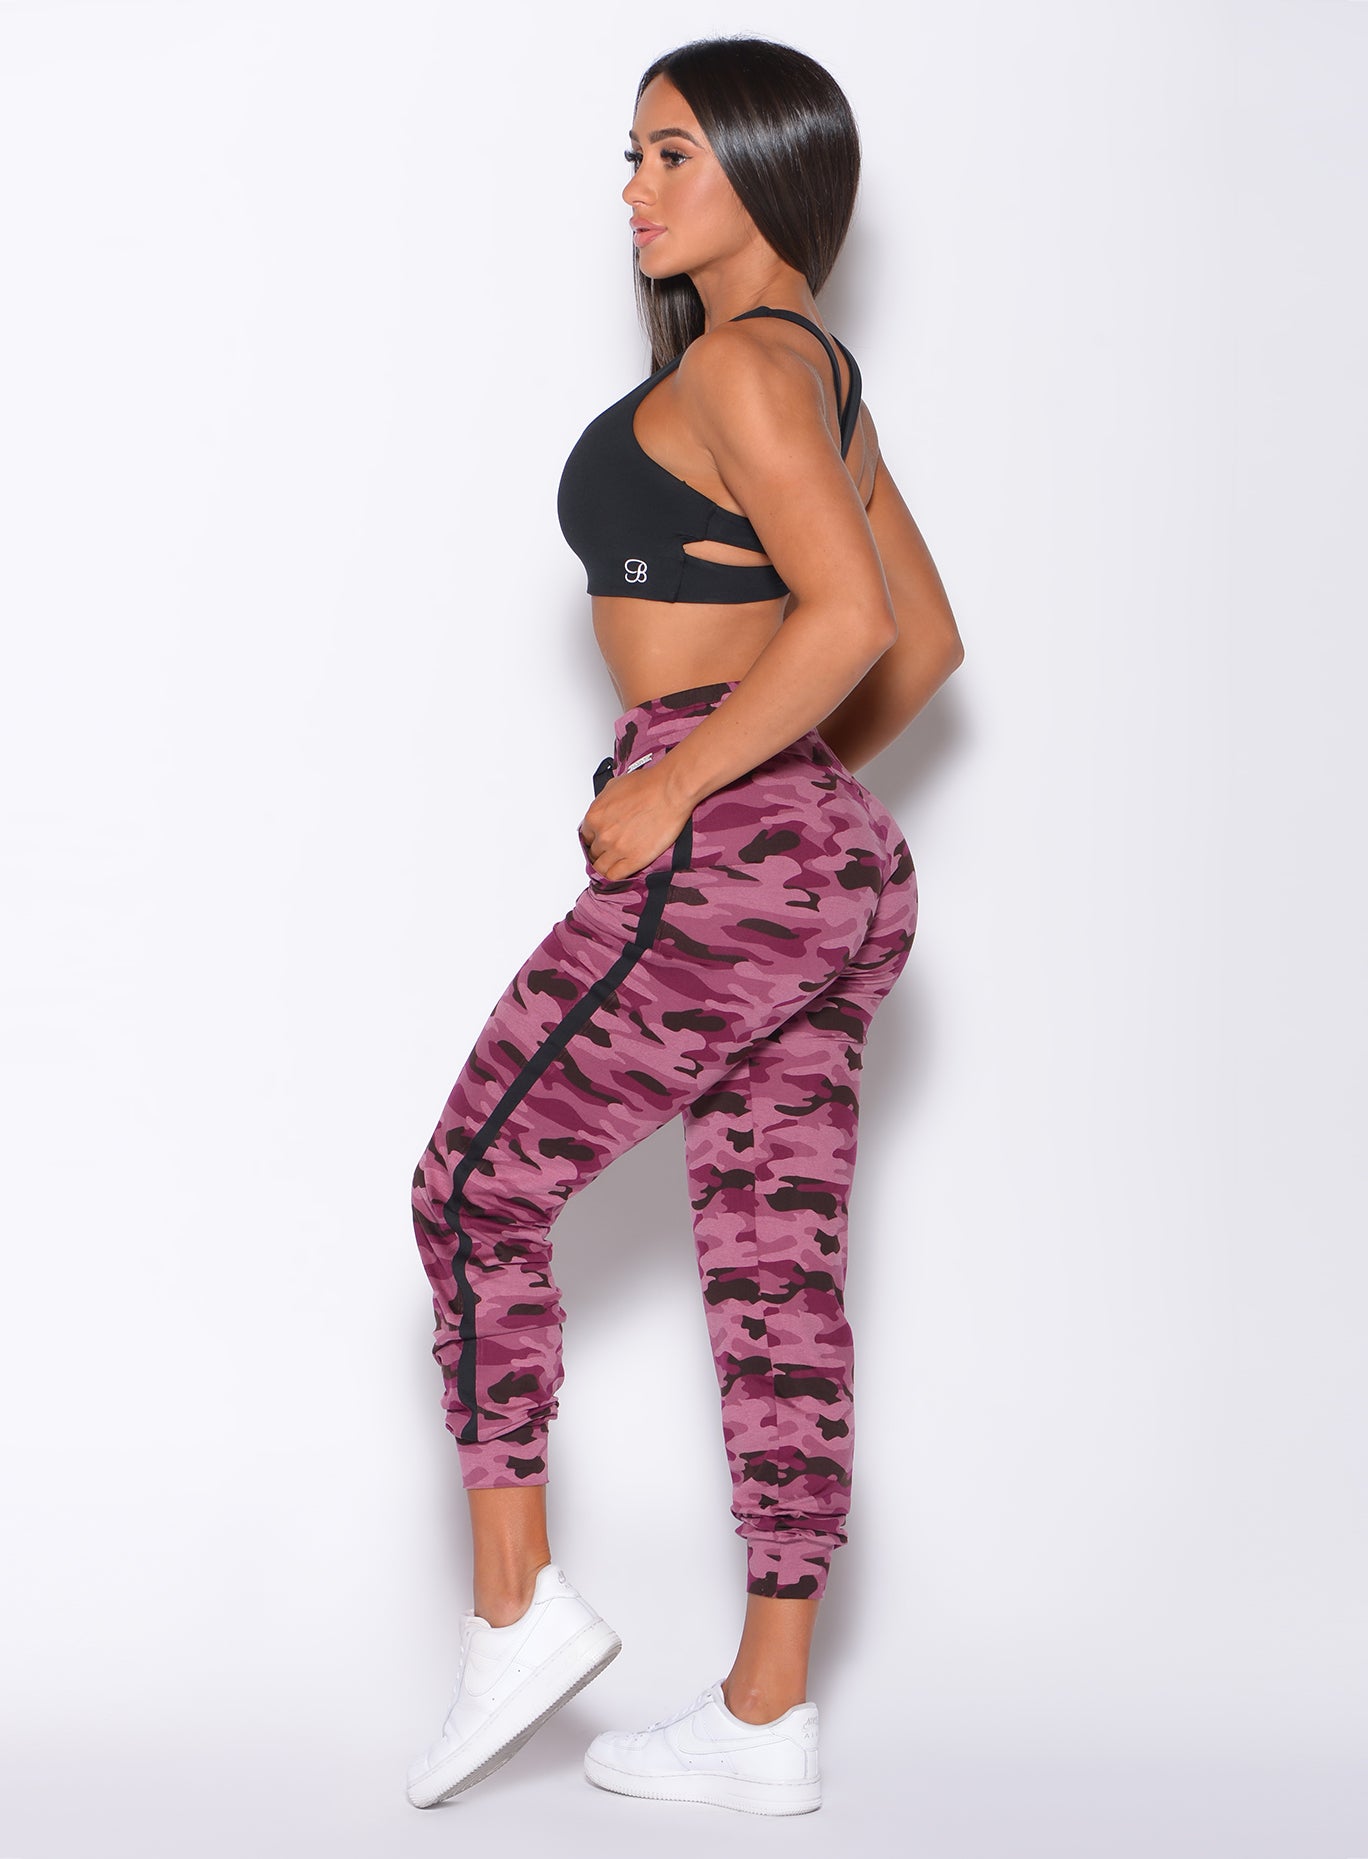 Left side  profile view of a model facing forward wearing our dream joggers in Purple Power Camo color and a black bra